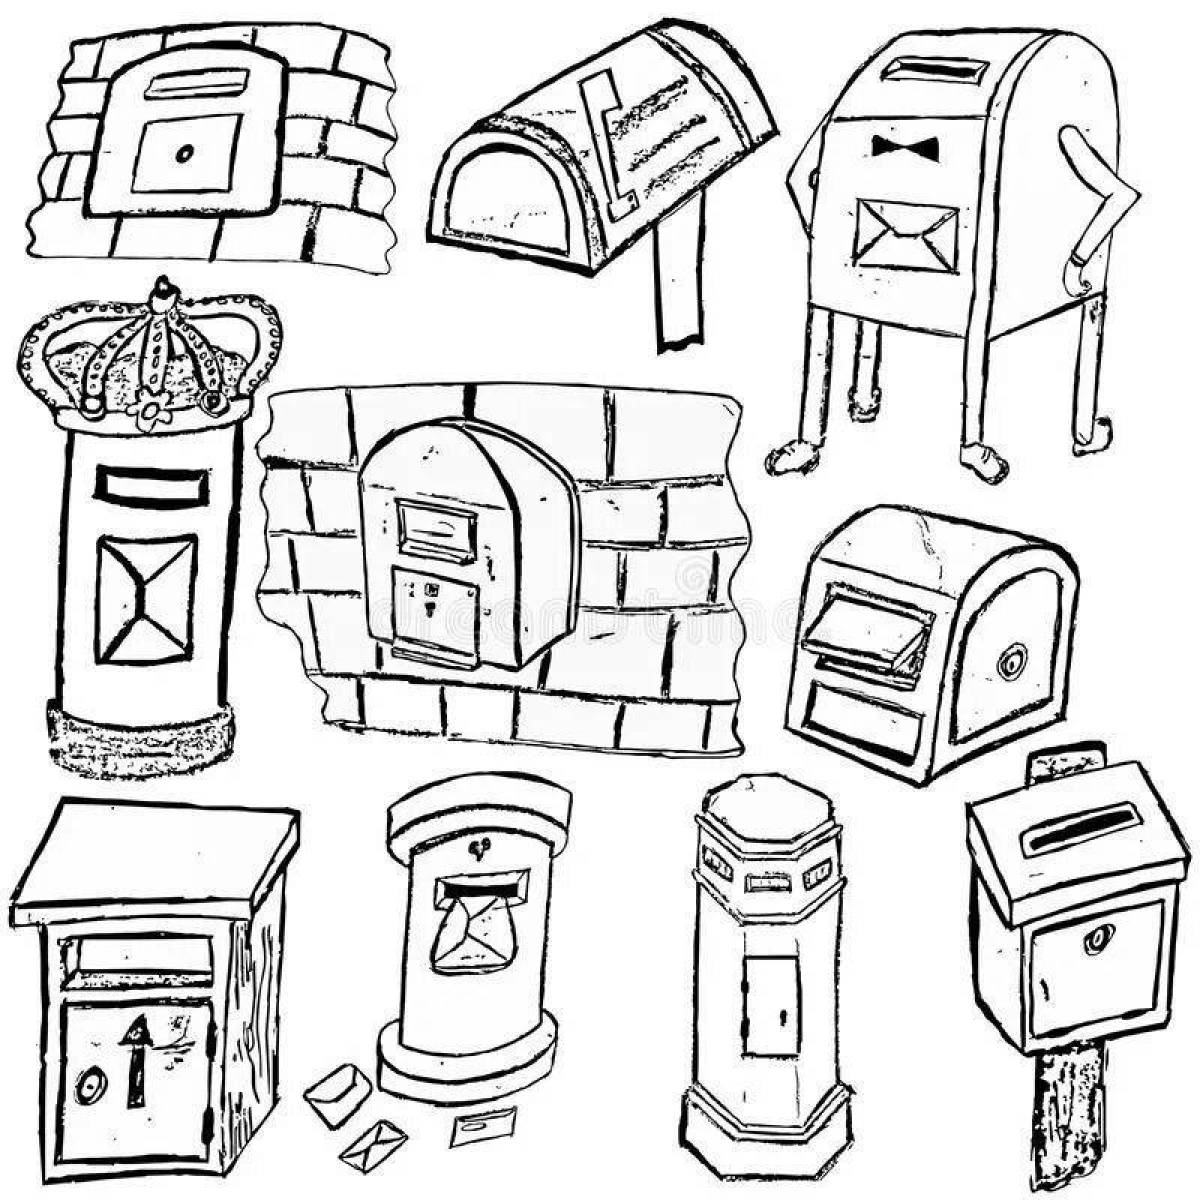 Live mailbox coloring page